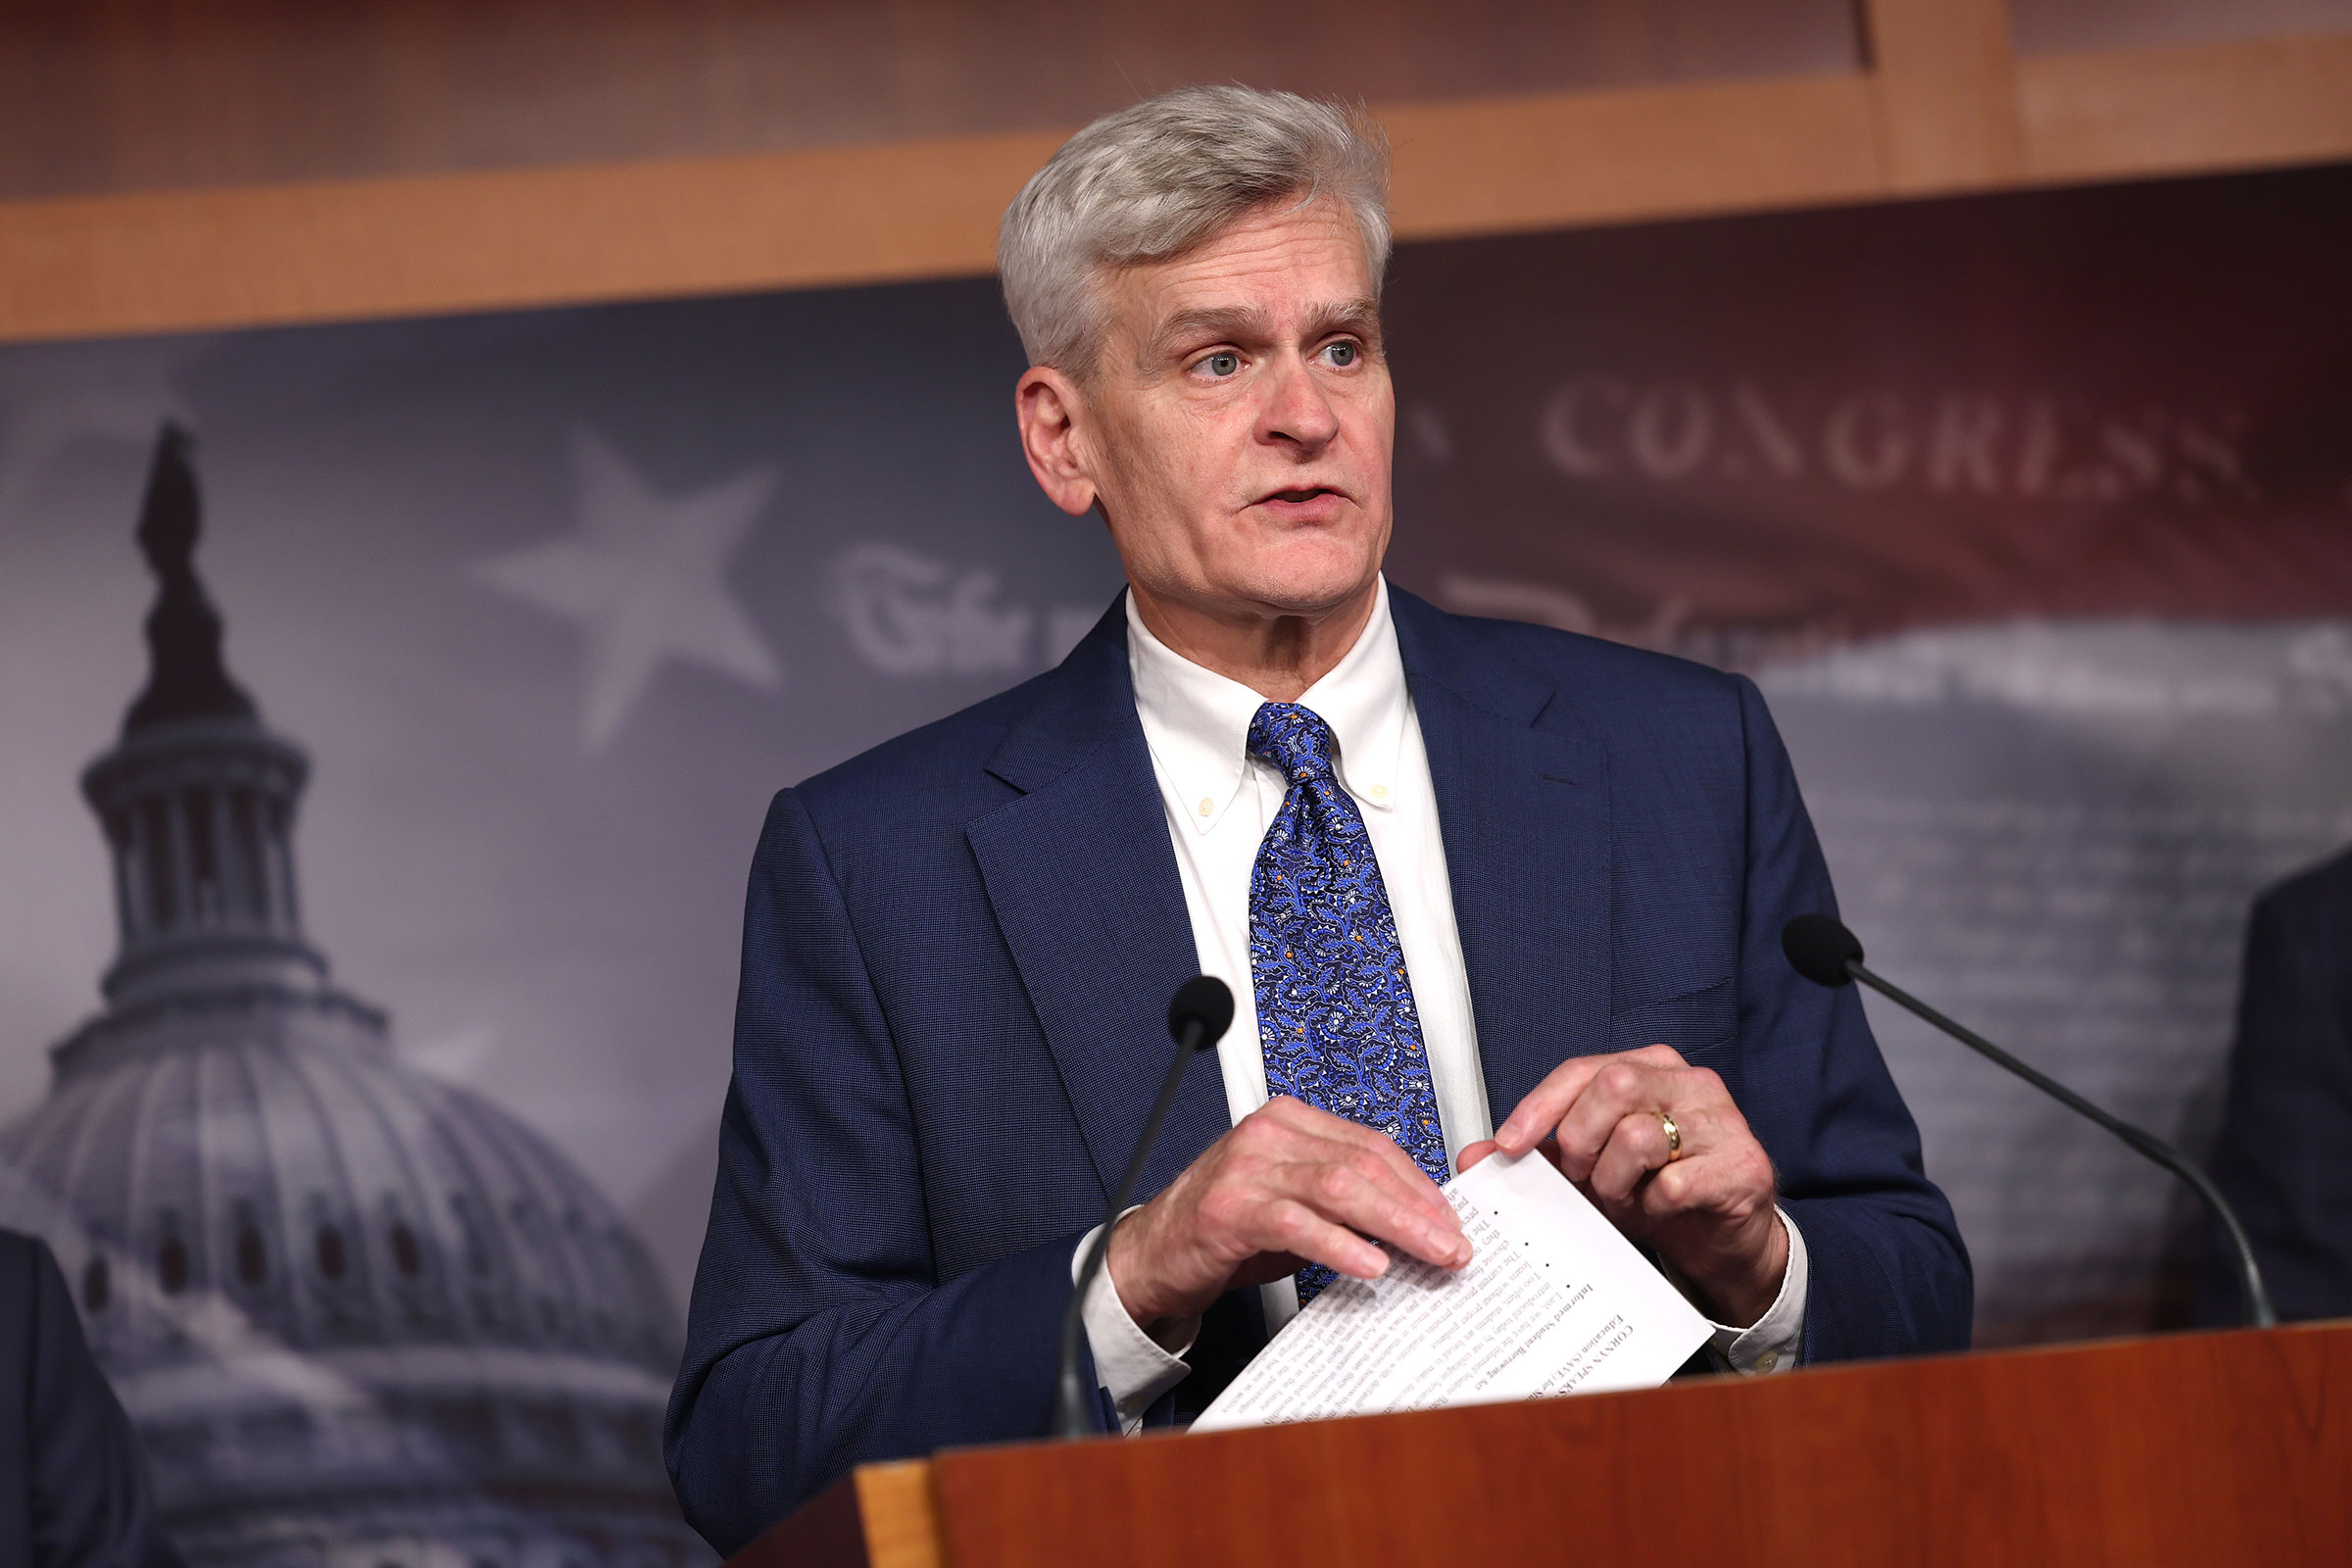 Sen. Bill Cassidy speaks at a press conference on student loans at the U.S. Capitol on June 14, 2023 in Washington, DC.